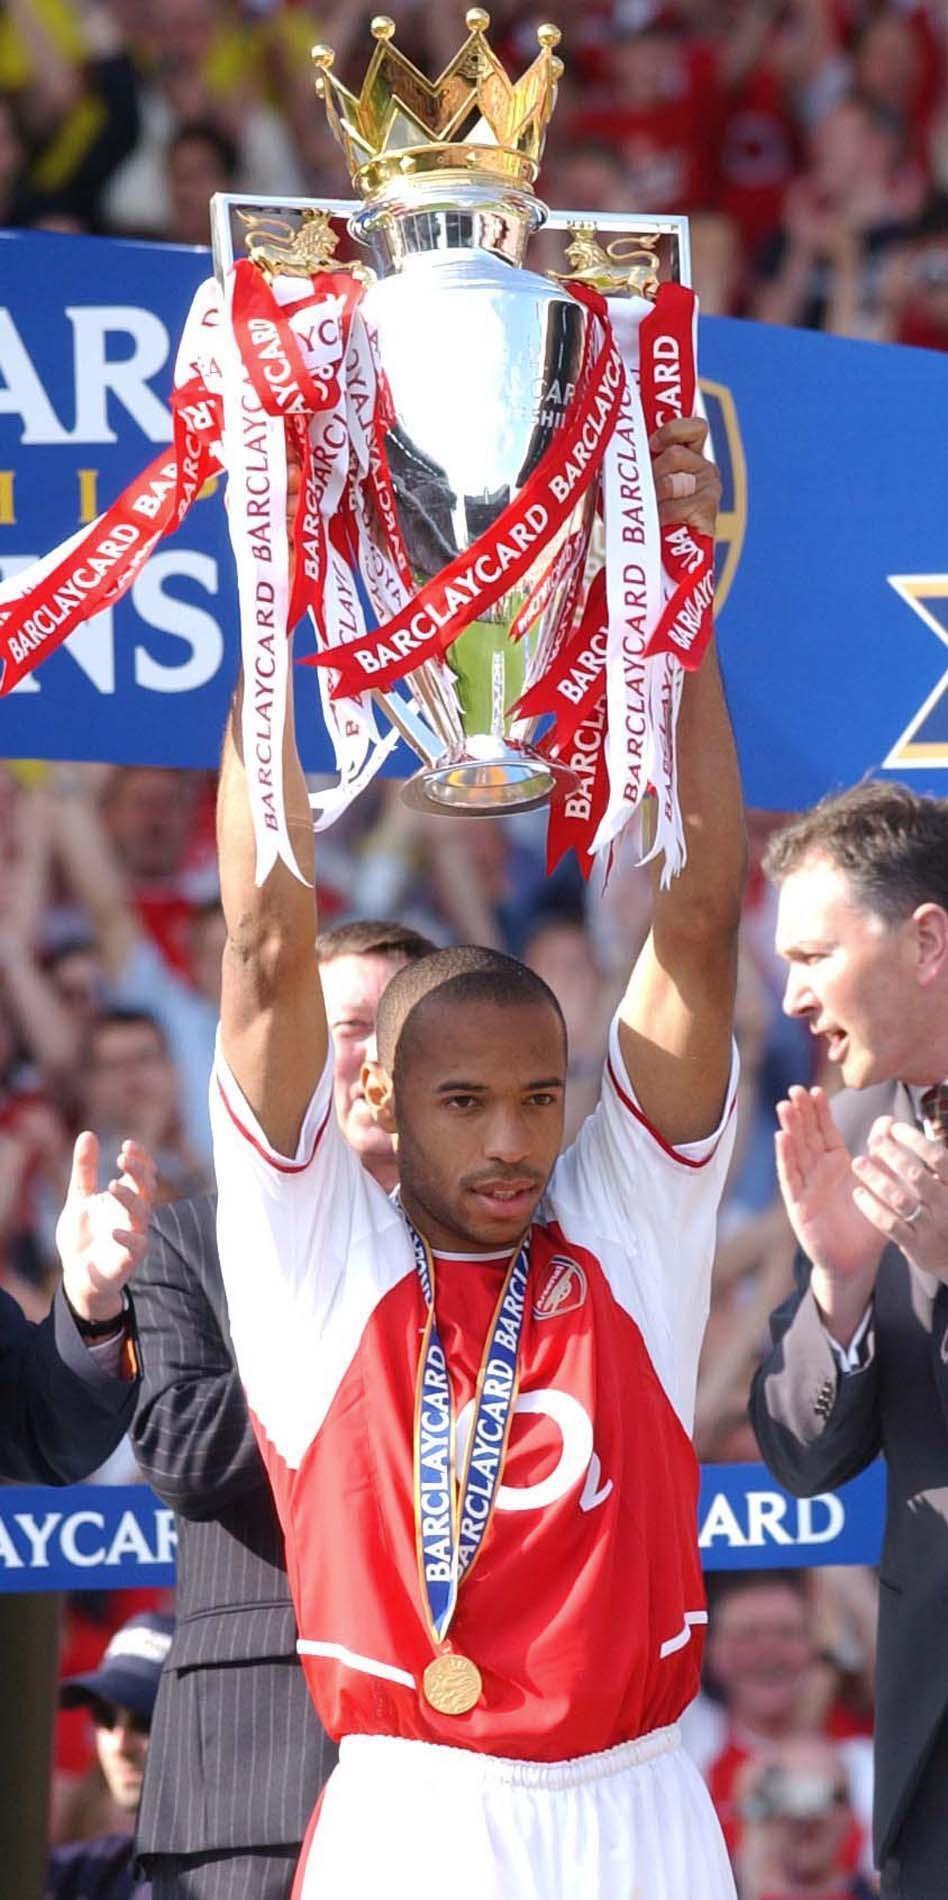 Shearer & Henry inducted into Premier League Hall of Fame